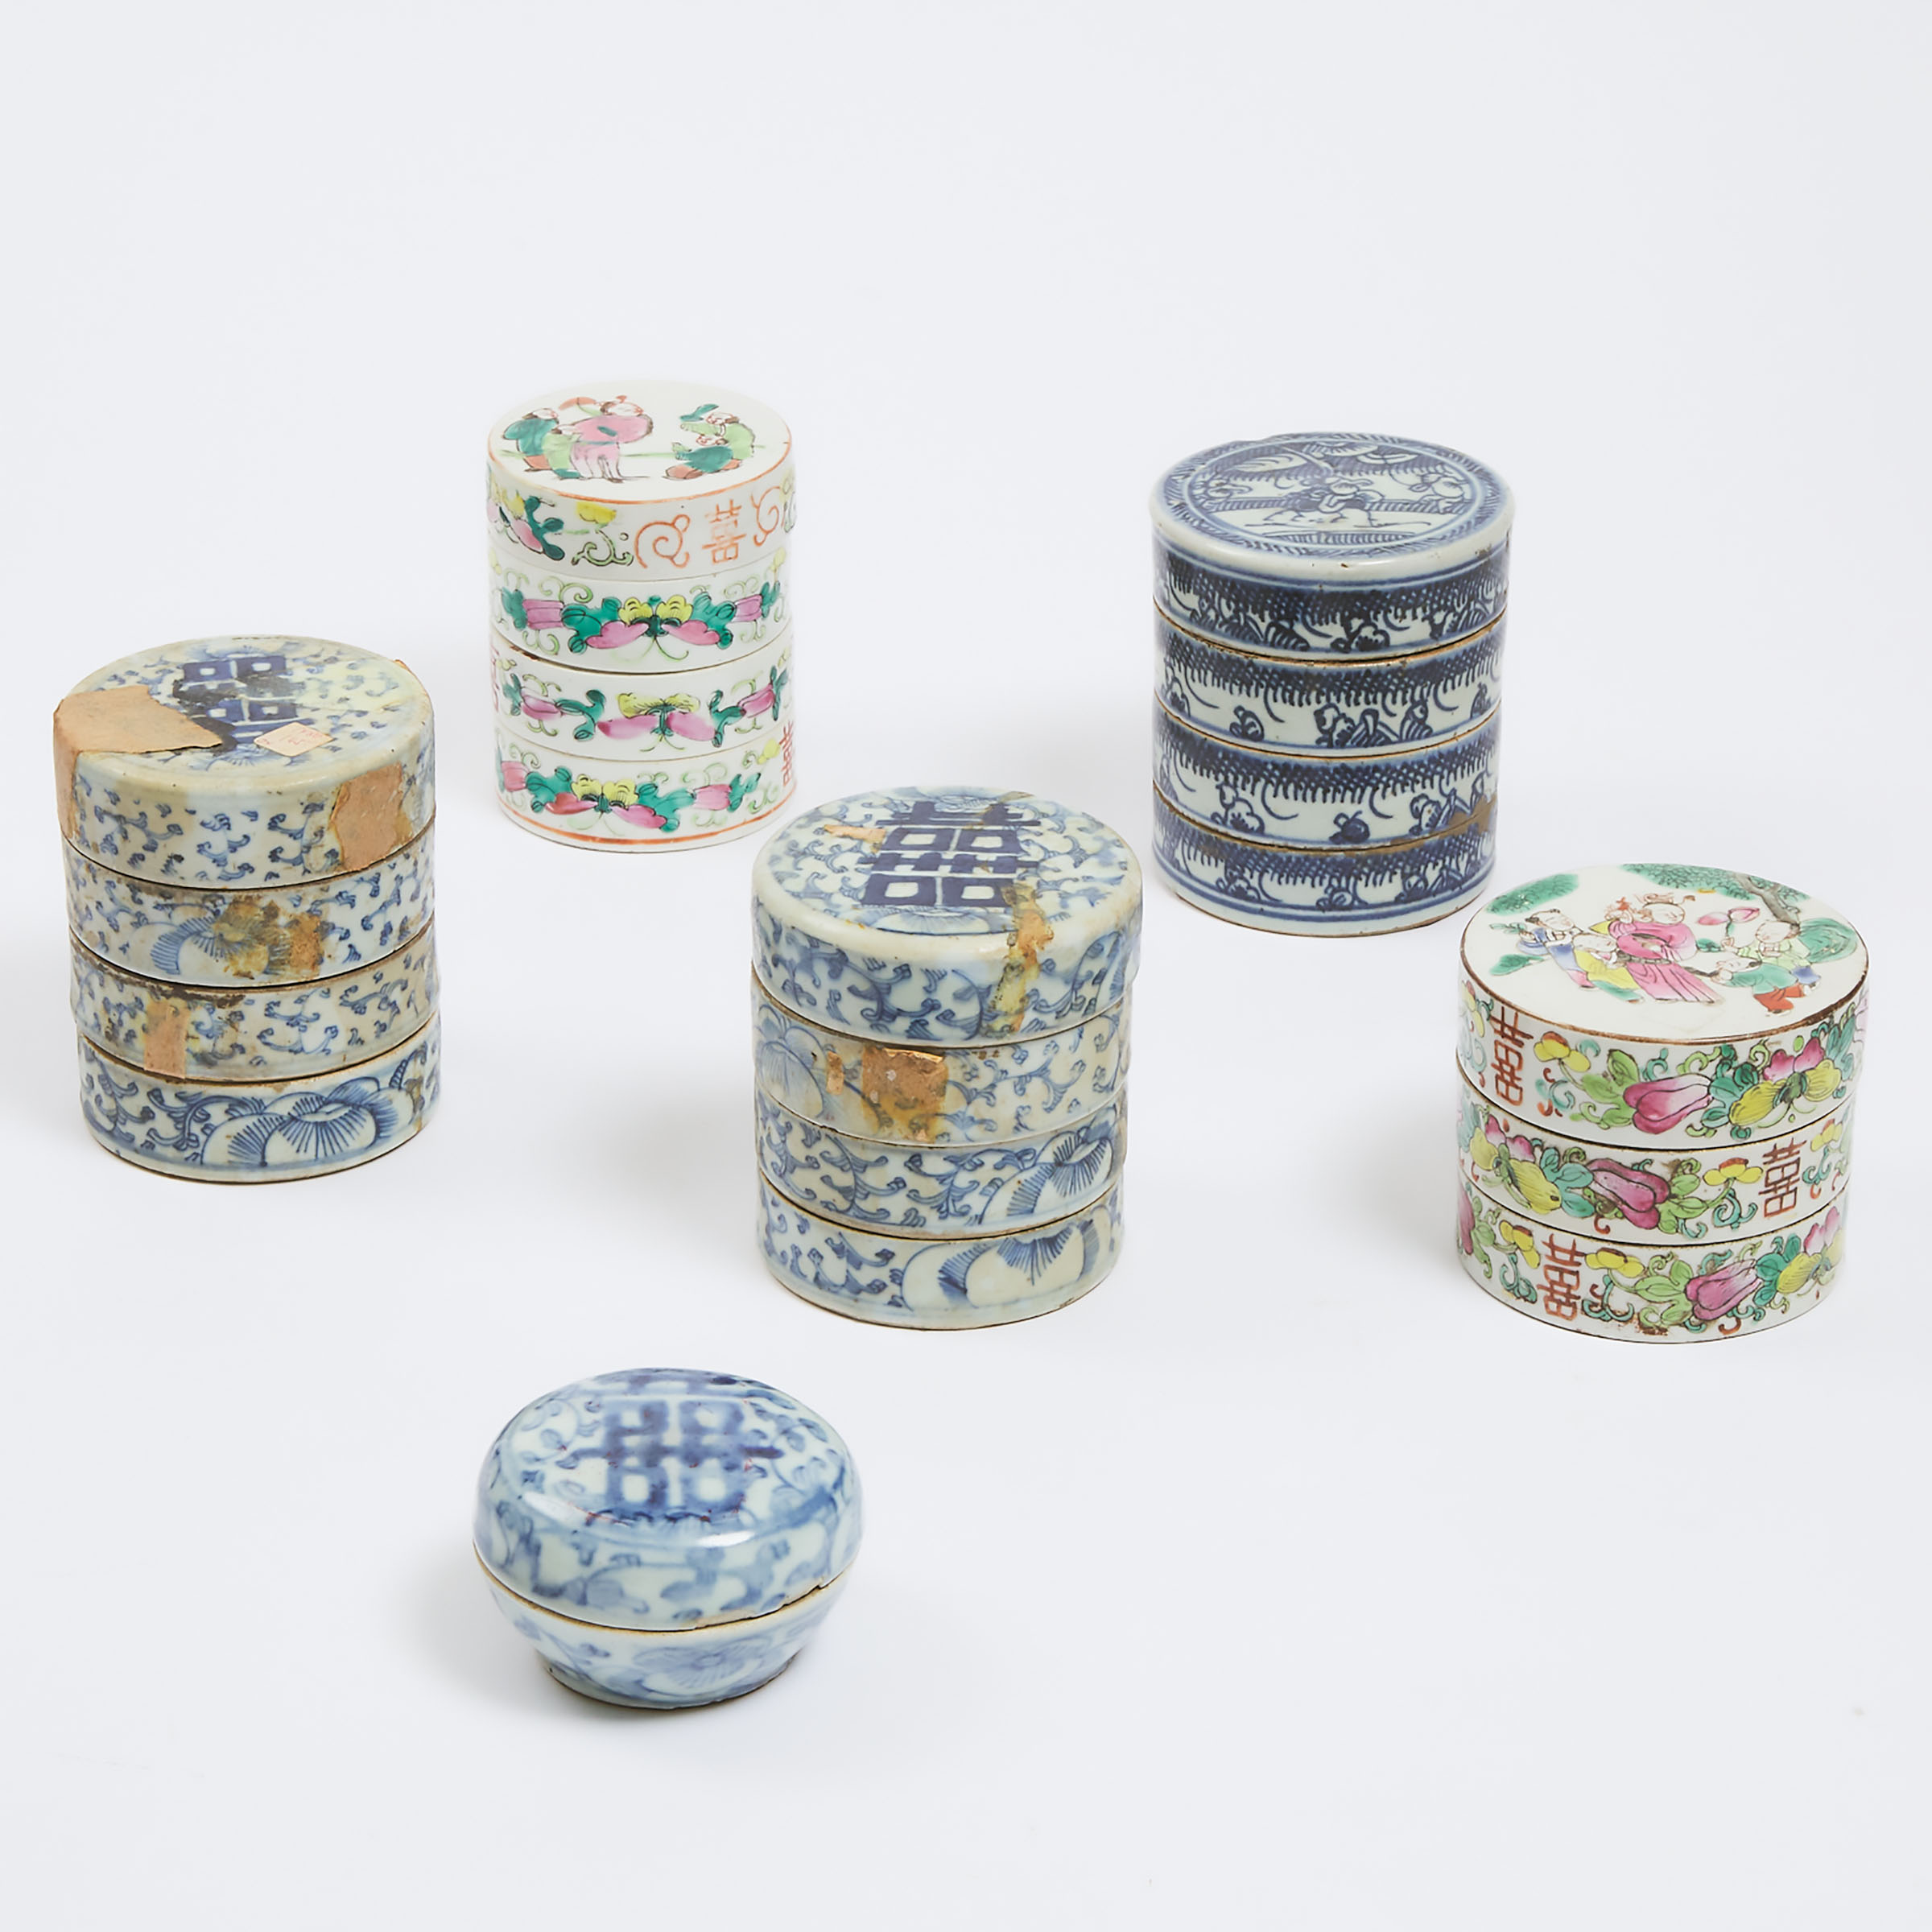 A Group of Six Chinese Porcelain Boxes, 19th Century and Later